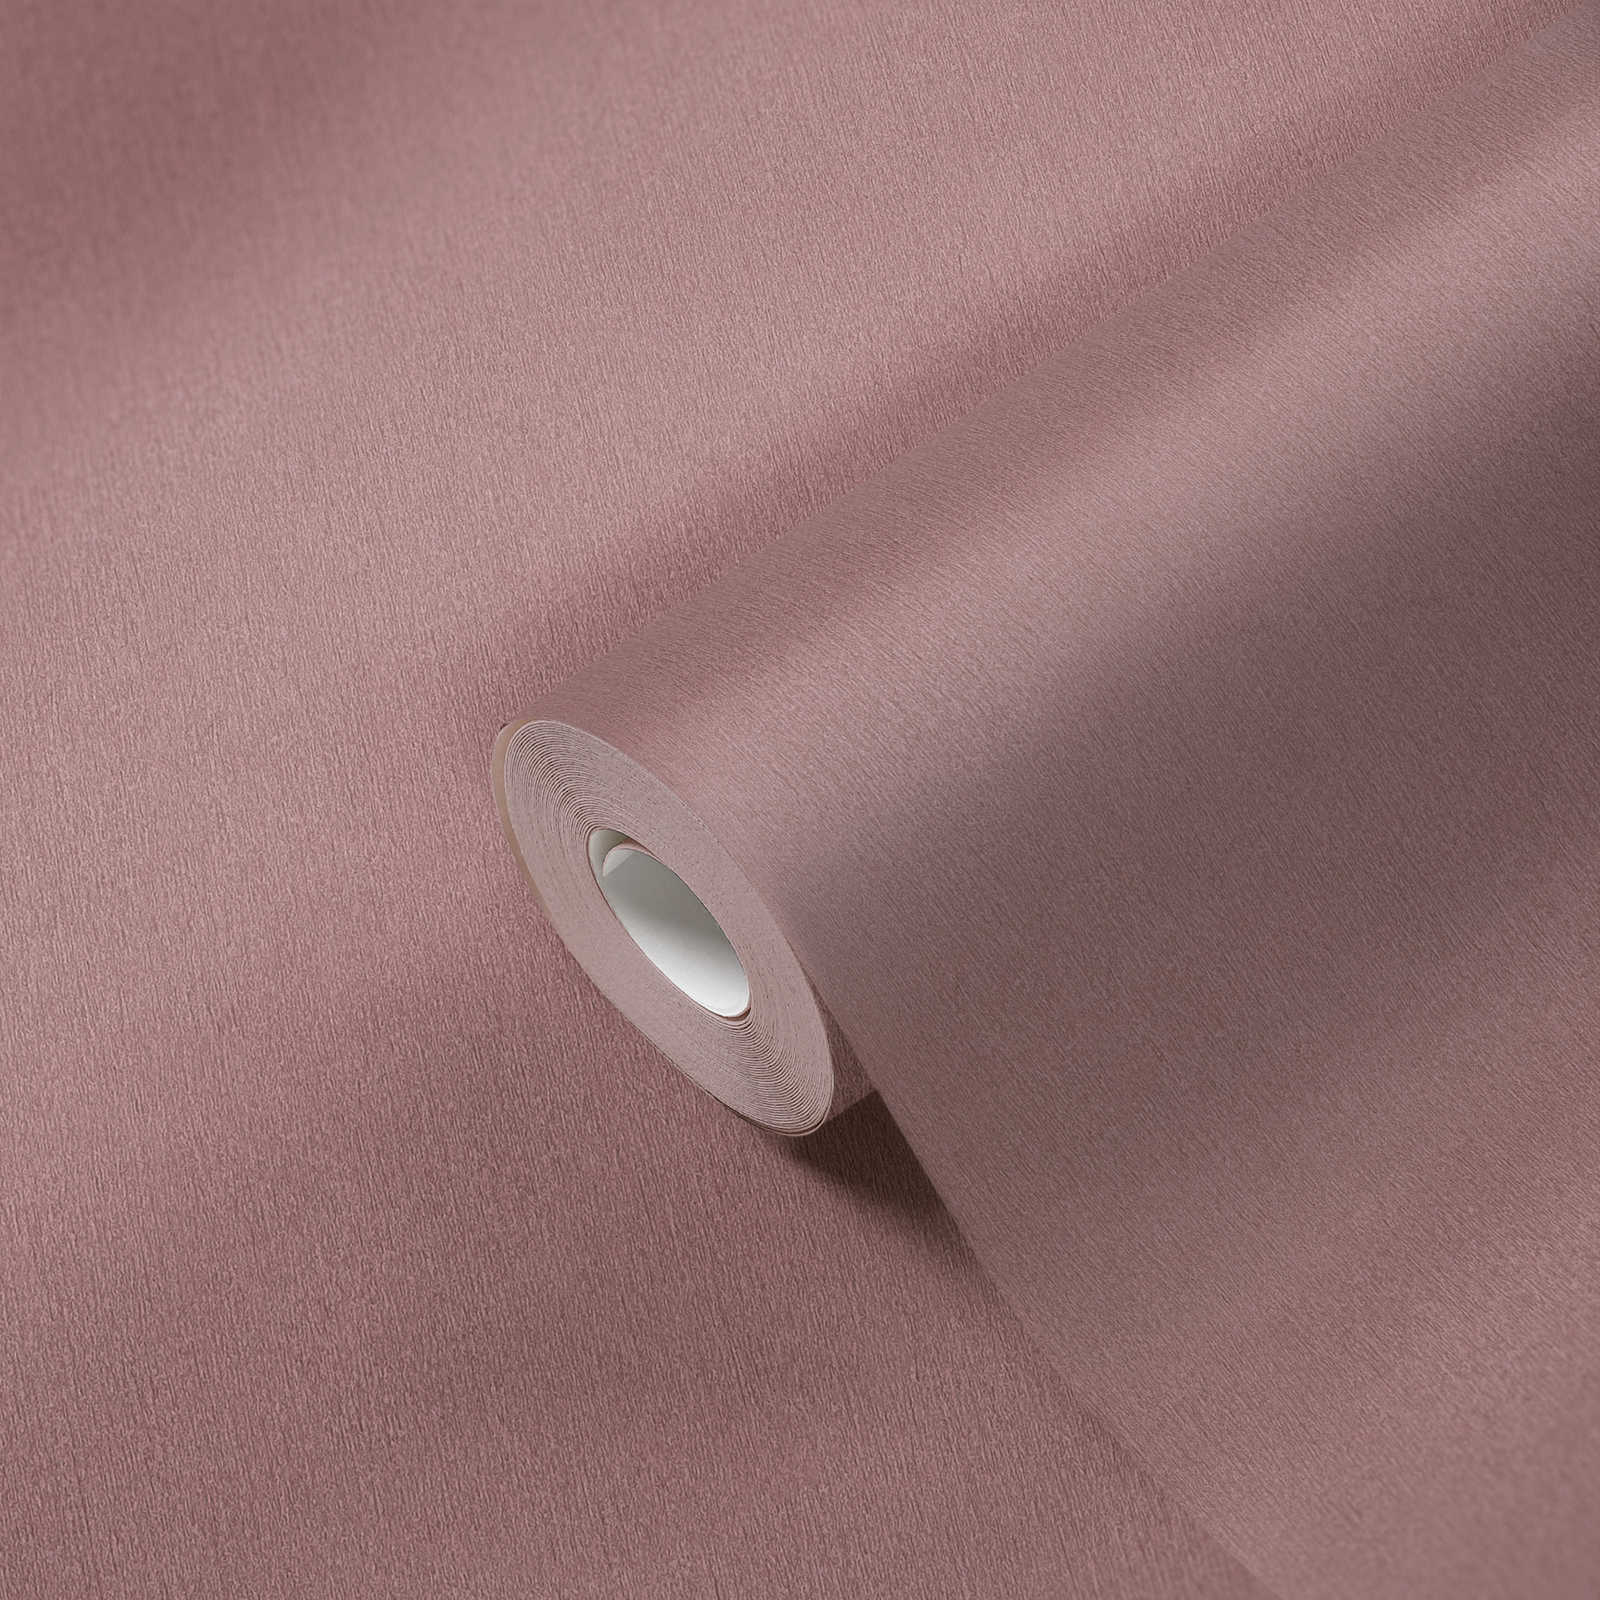             Plain wallpaper old pink with colour hatching
        